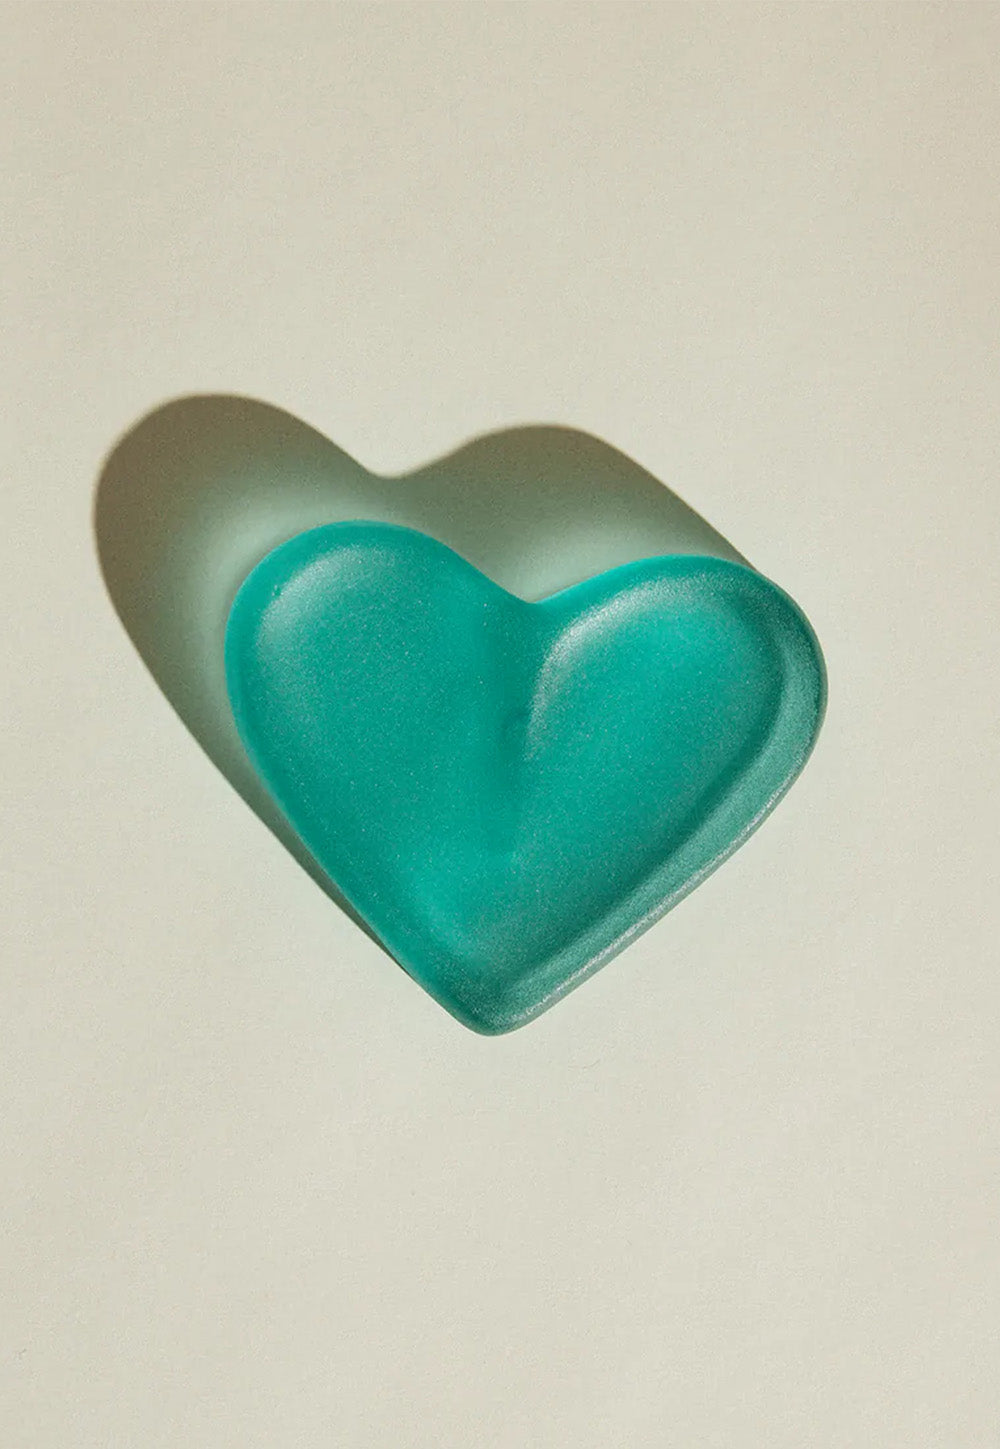 Glo-Heart - Lagoon sold by Angel Divine